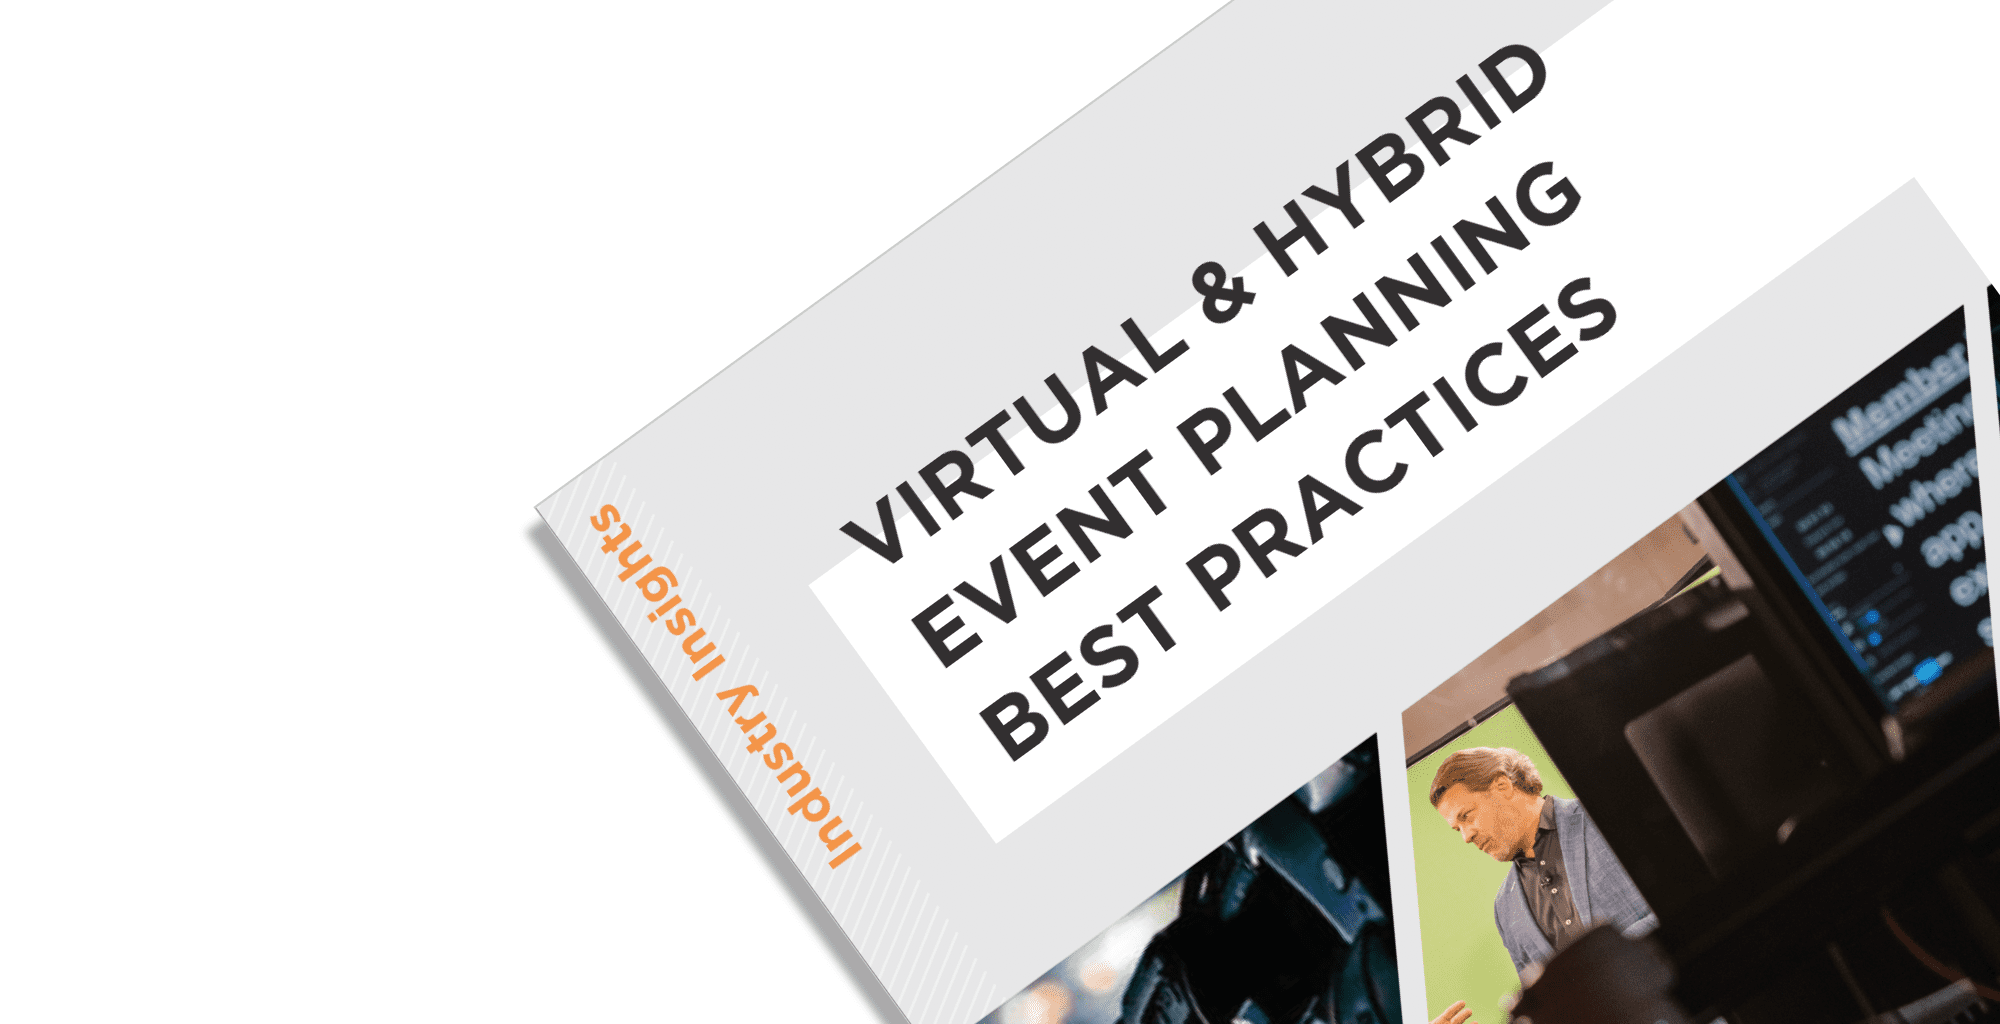 Featured image for “Virtual, Hybrid, or In-Person? Your guide for events in 2021”